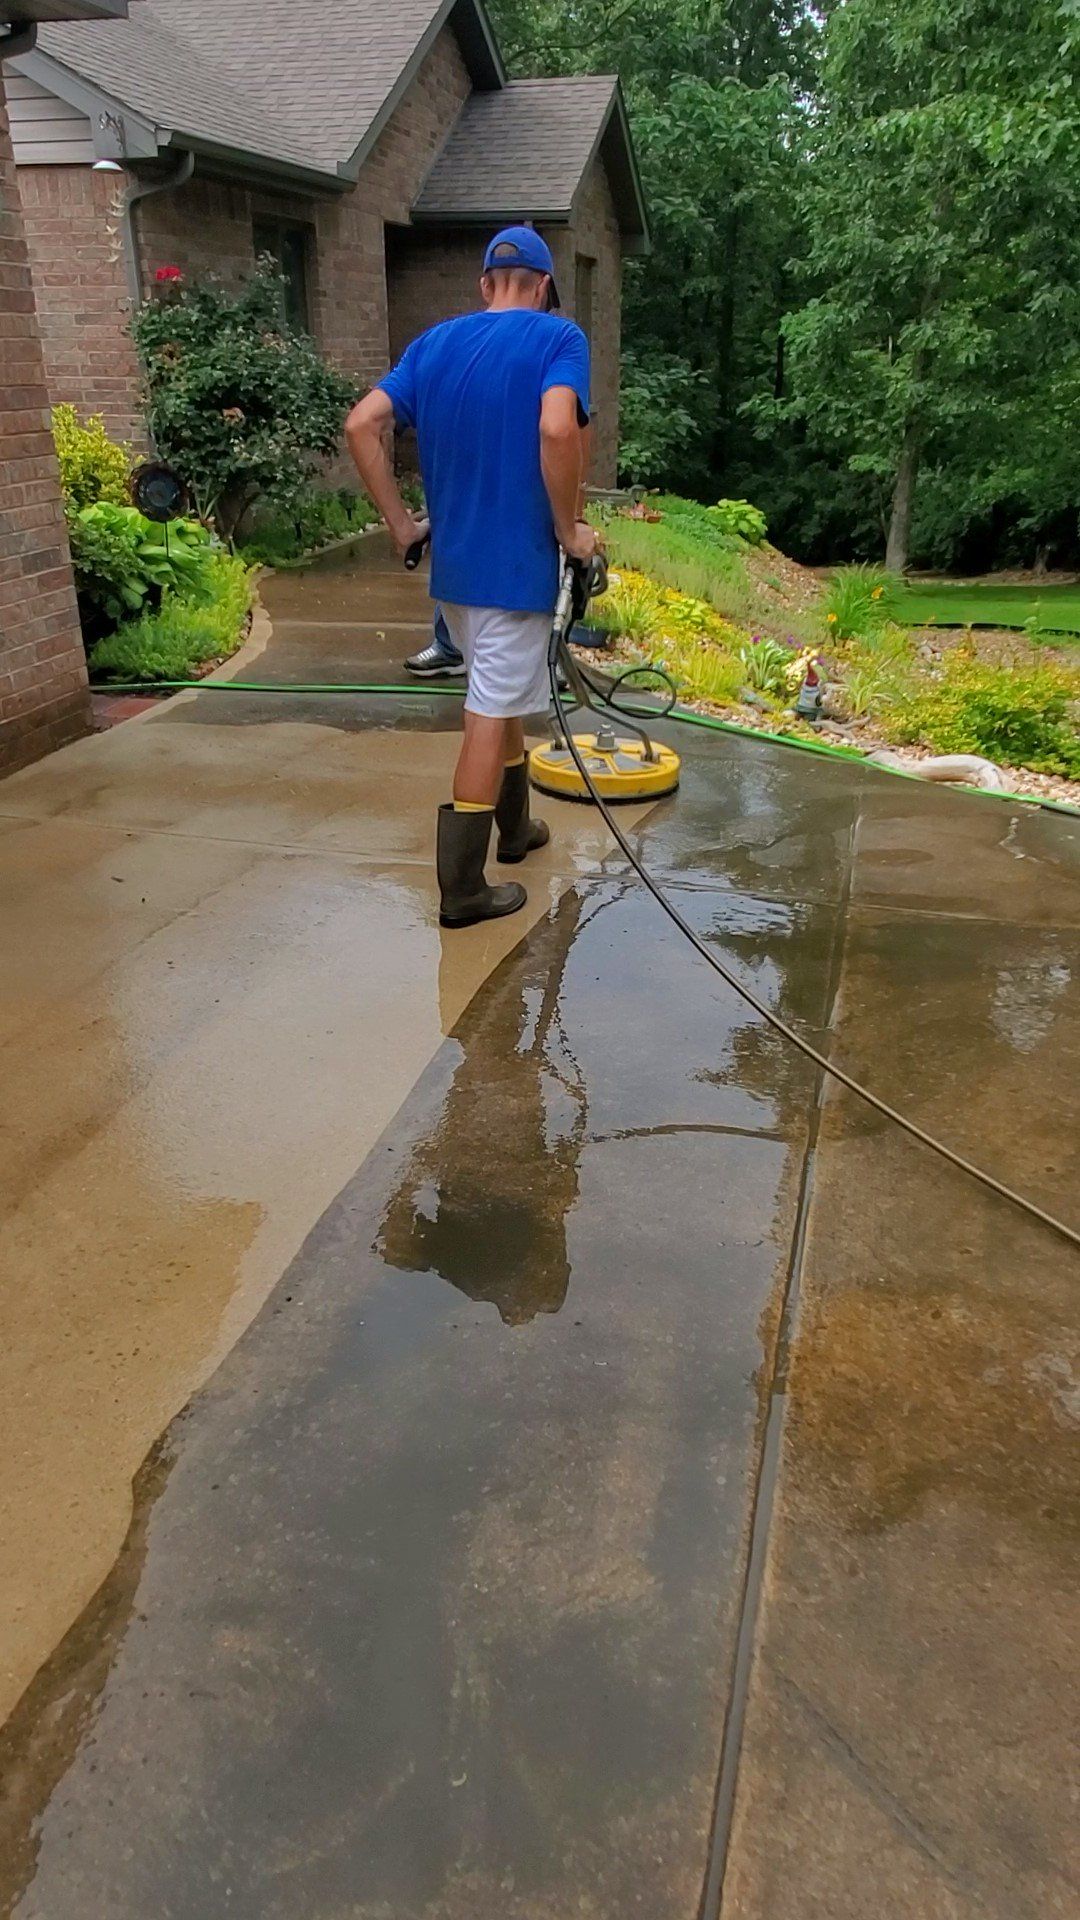 A man is cleaning a driveway with a machine.